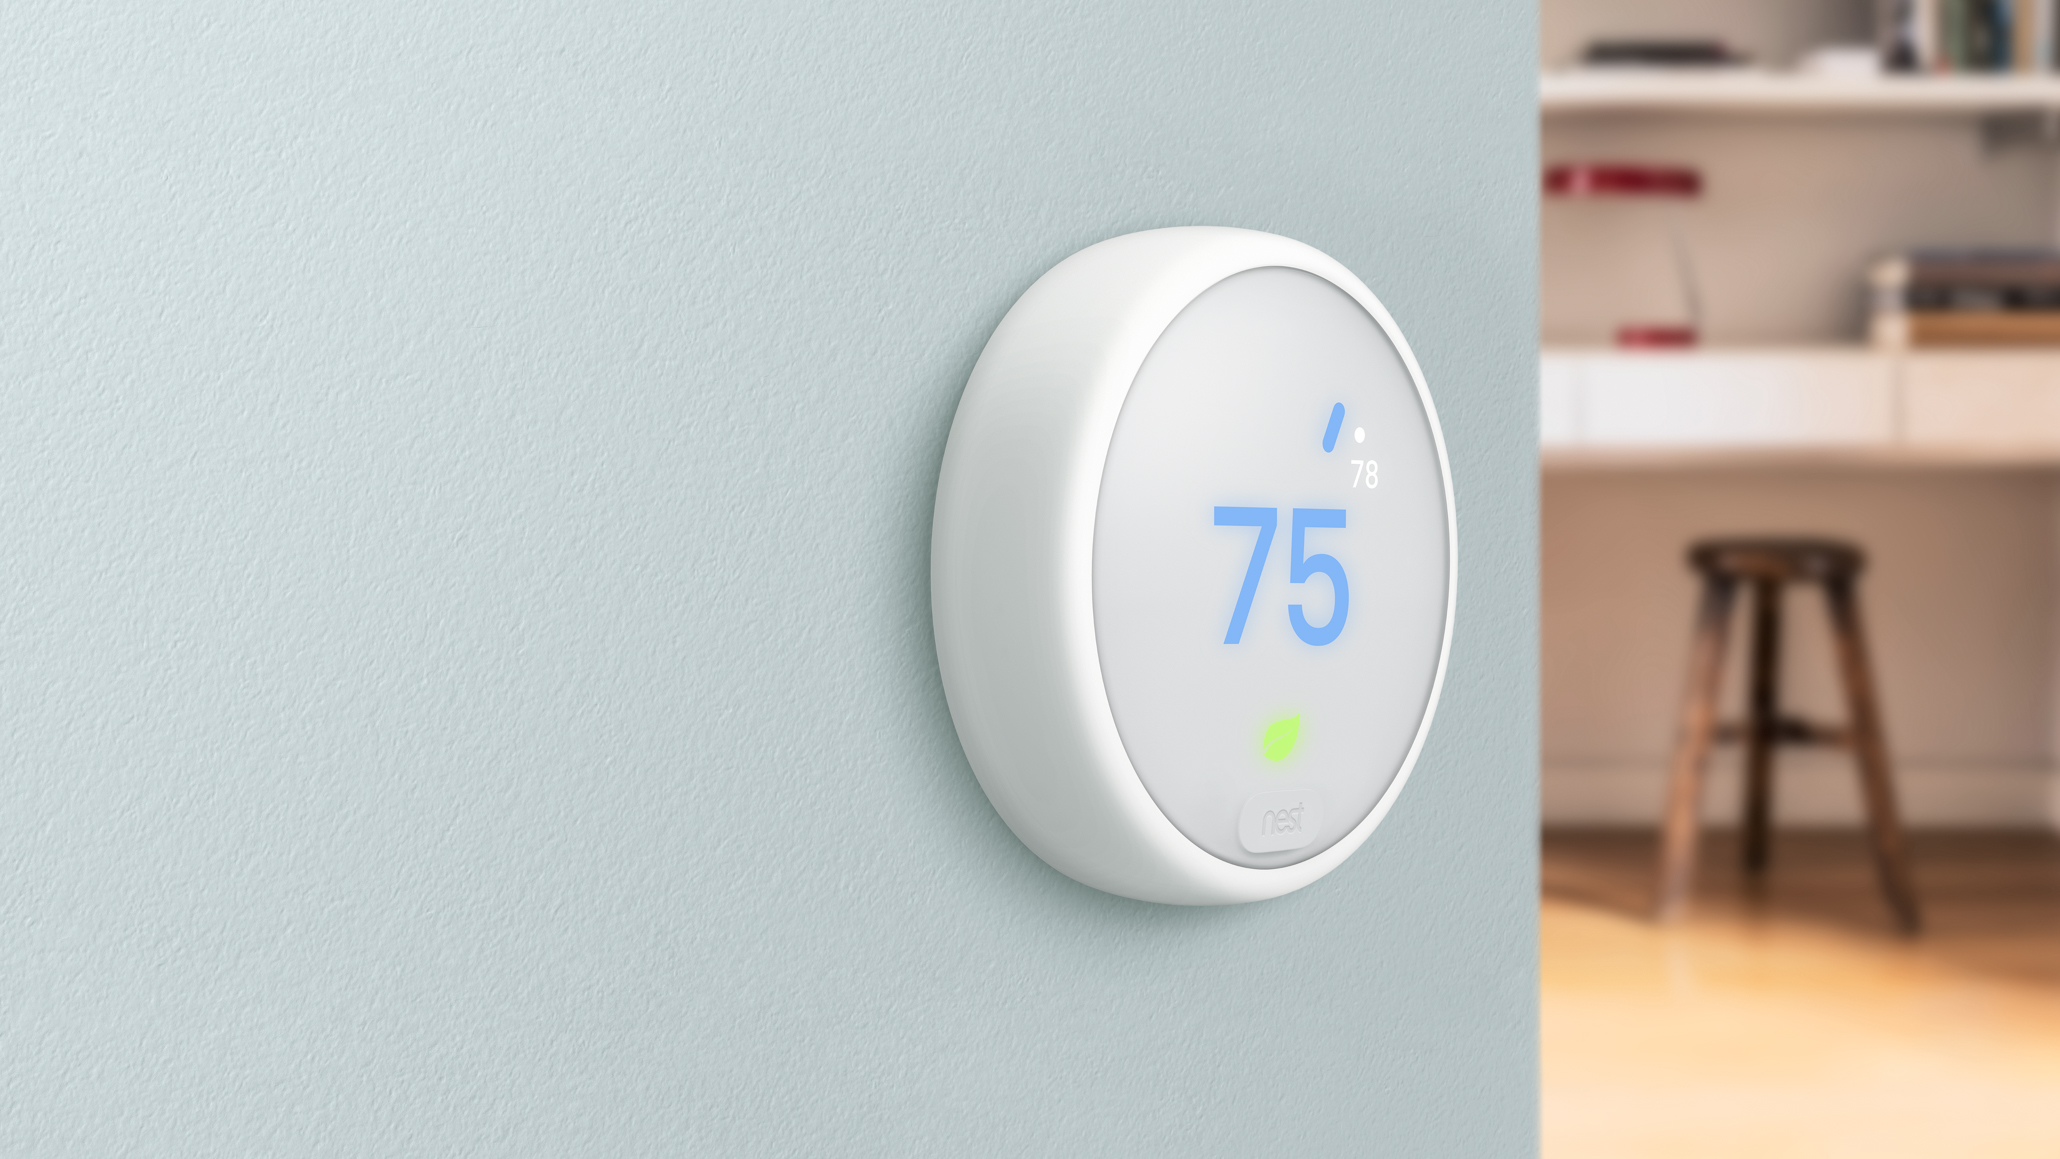 The Nest line of smart thermostats launched this genre of connected home product. Their latest model is the Nest Thermostat E, offered at a lower cost point. Image: Nest.